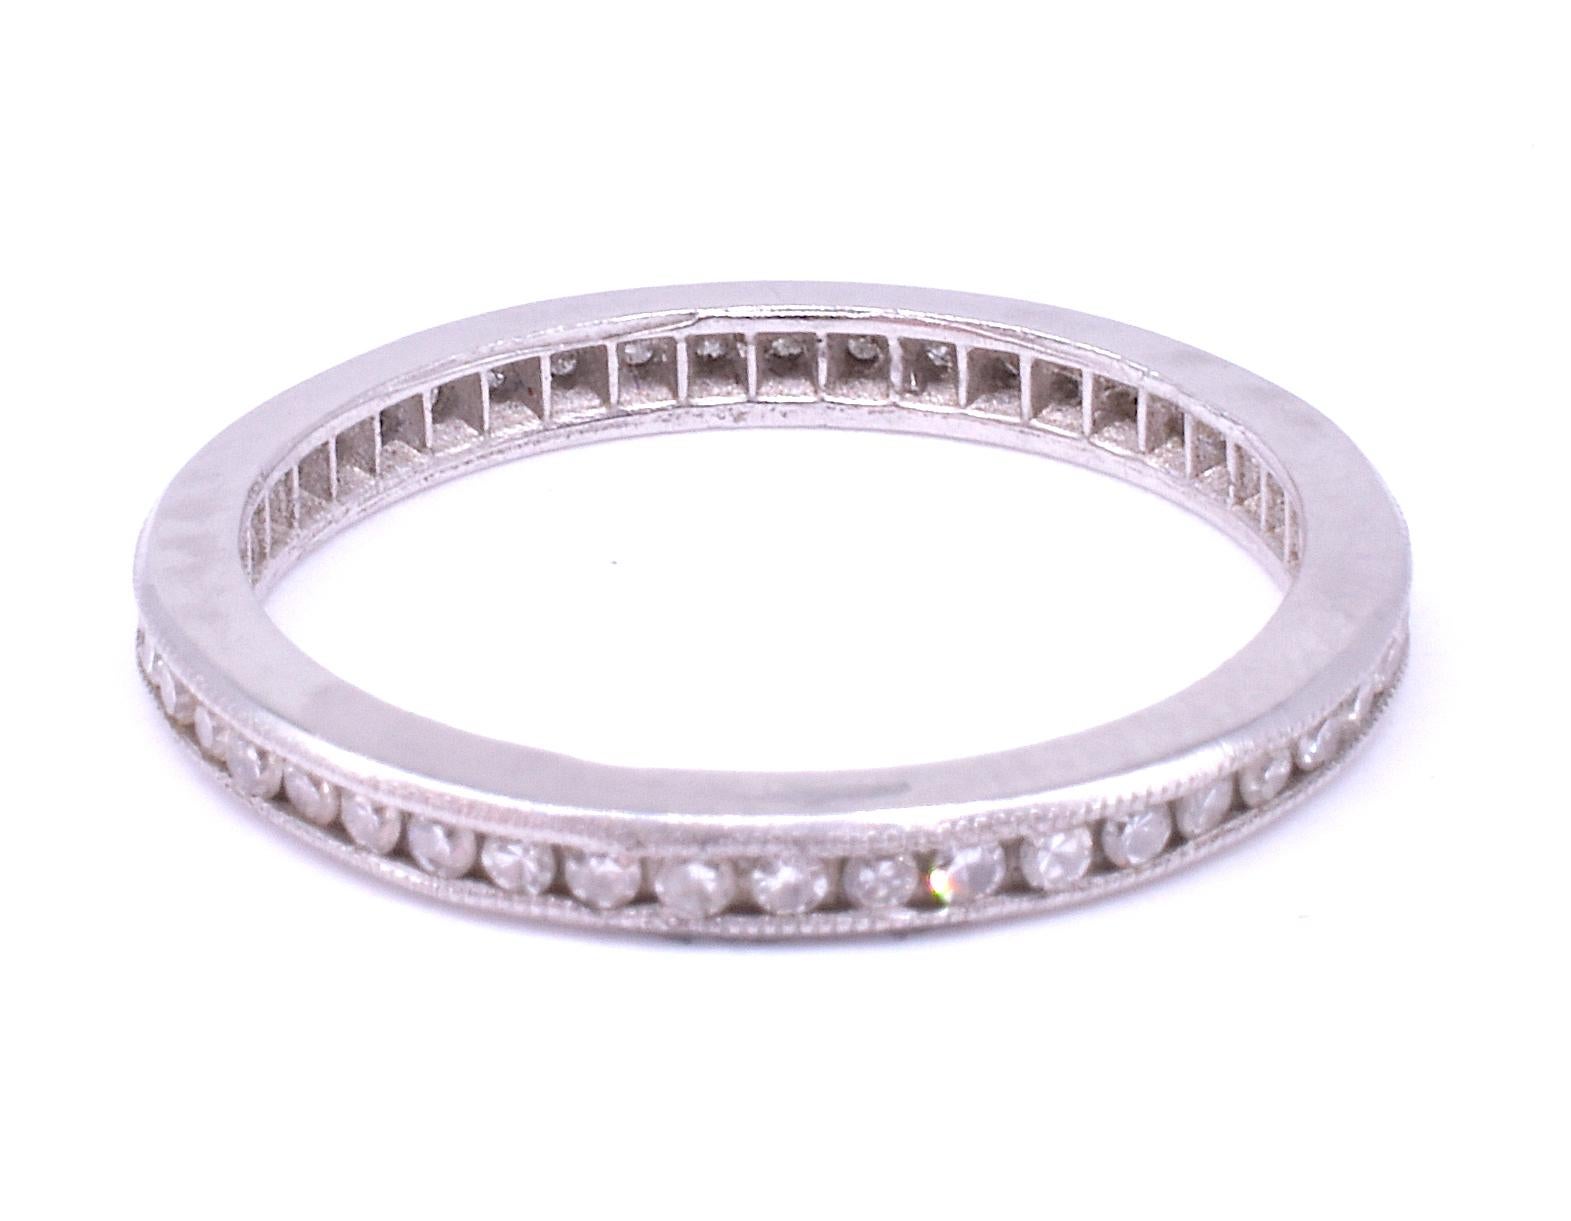 Our C1930 diamond platinum eternity band is a slim polished band that packs a lot of punch! Notice how just a sliver of a ring glimmers and sparkles on the hand. Eternity bands, with their continuous line of identical gemstones circling the band,